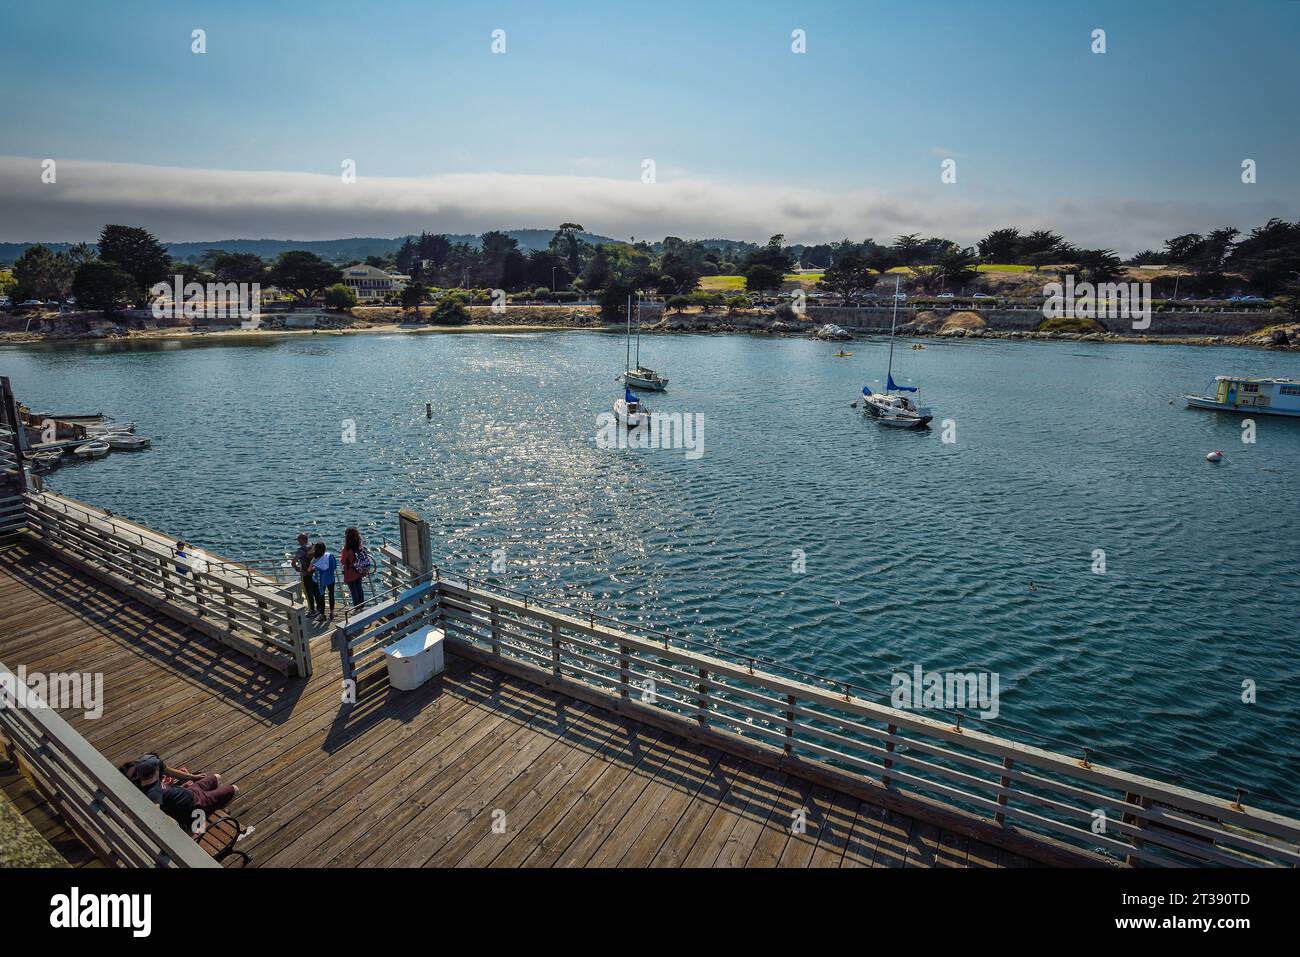 Monterey Bay seen from the Decks of the Old Fisherman's Wharf - California Stock Photo